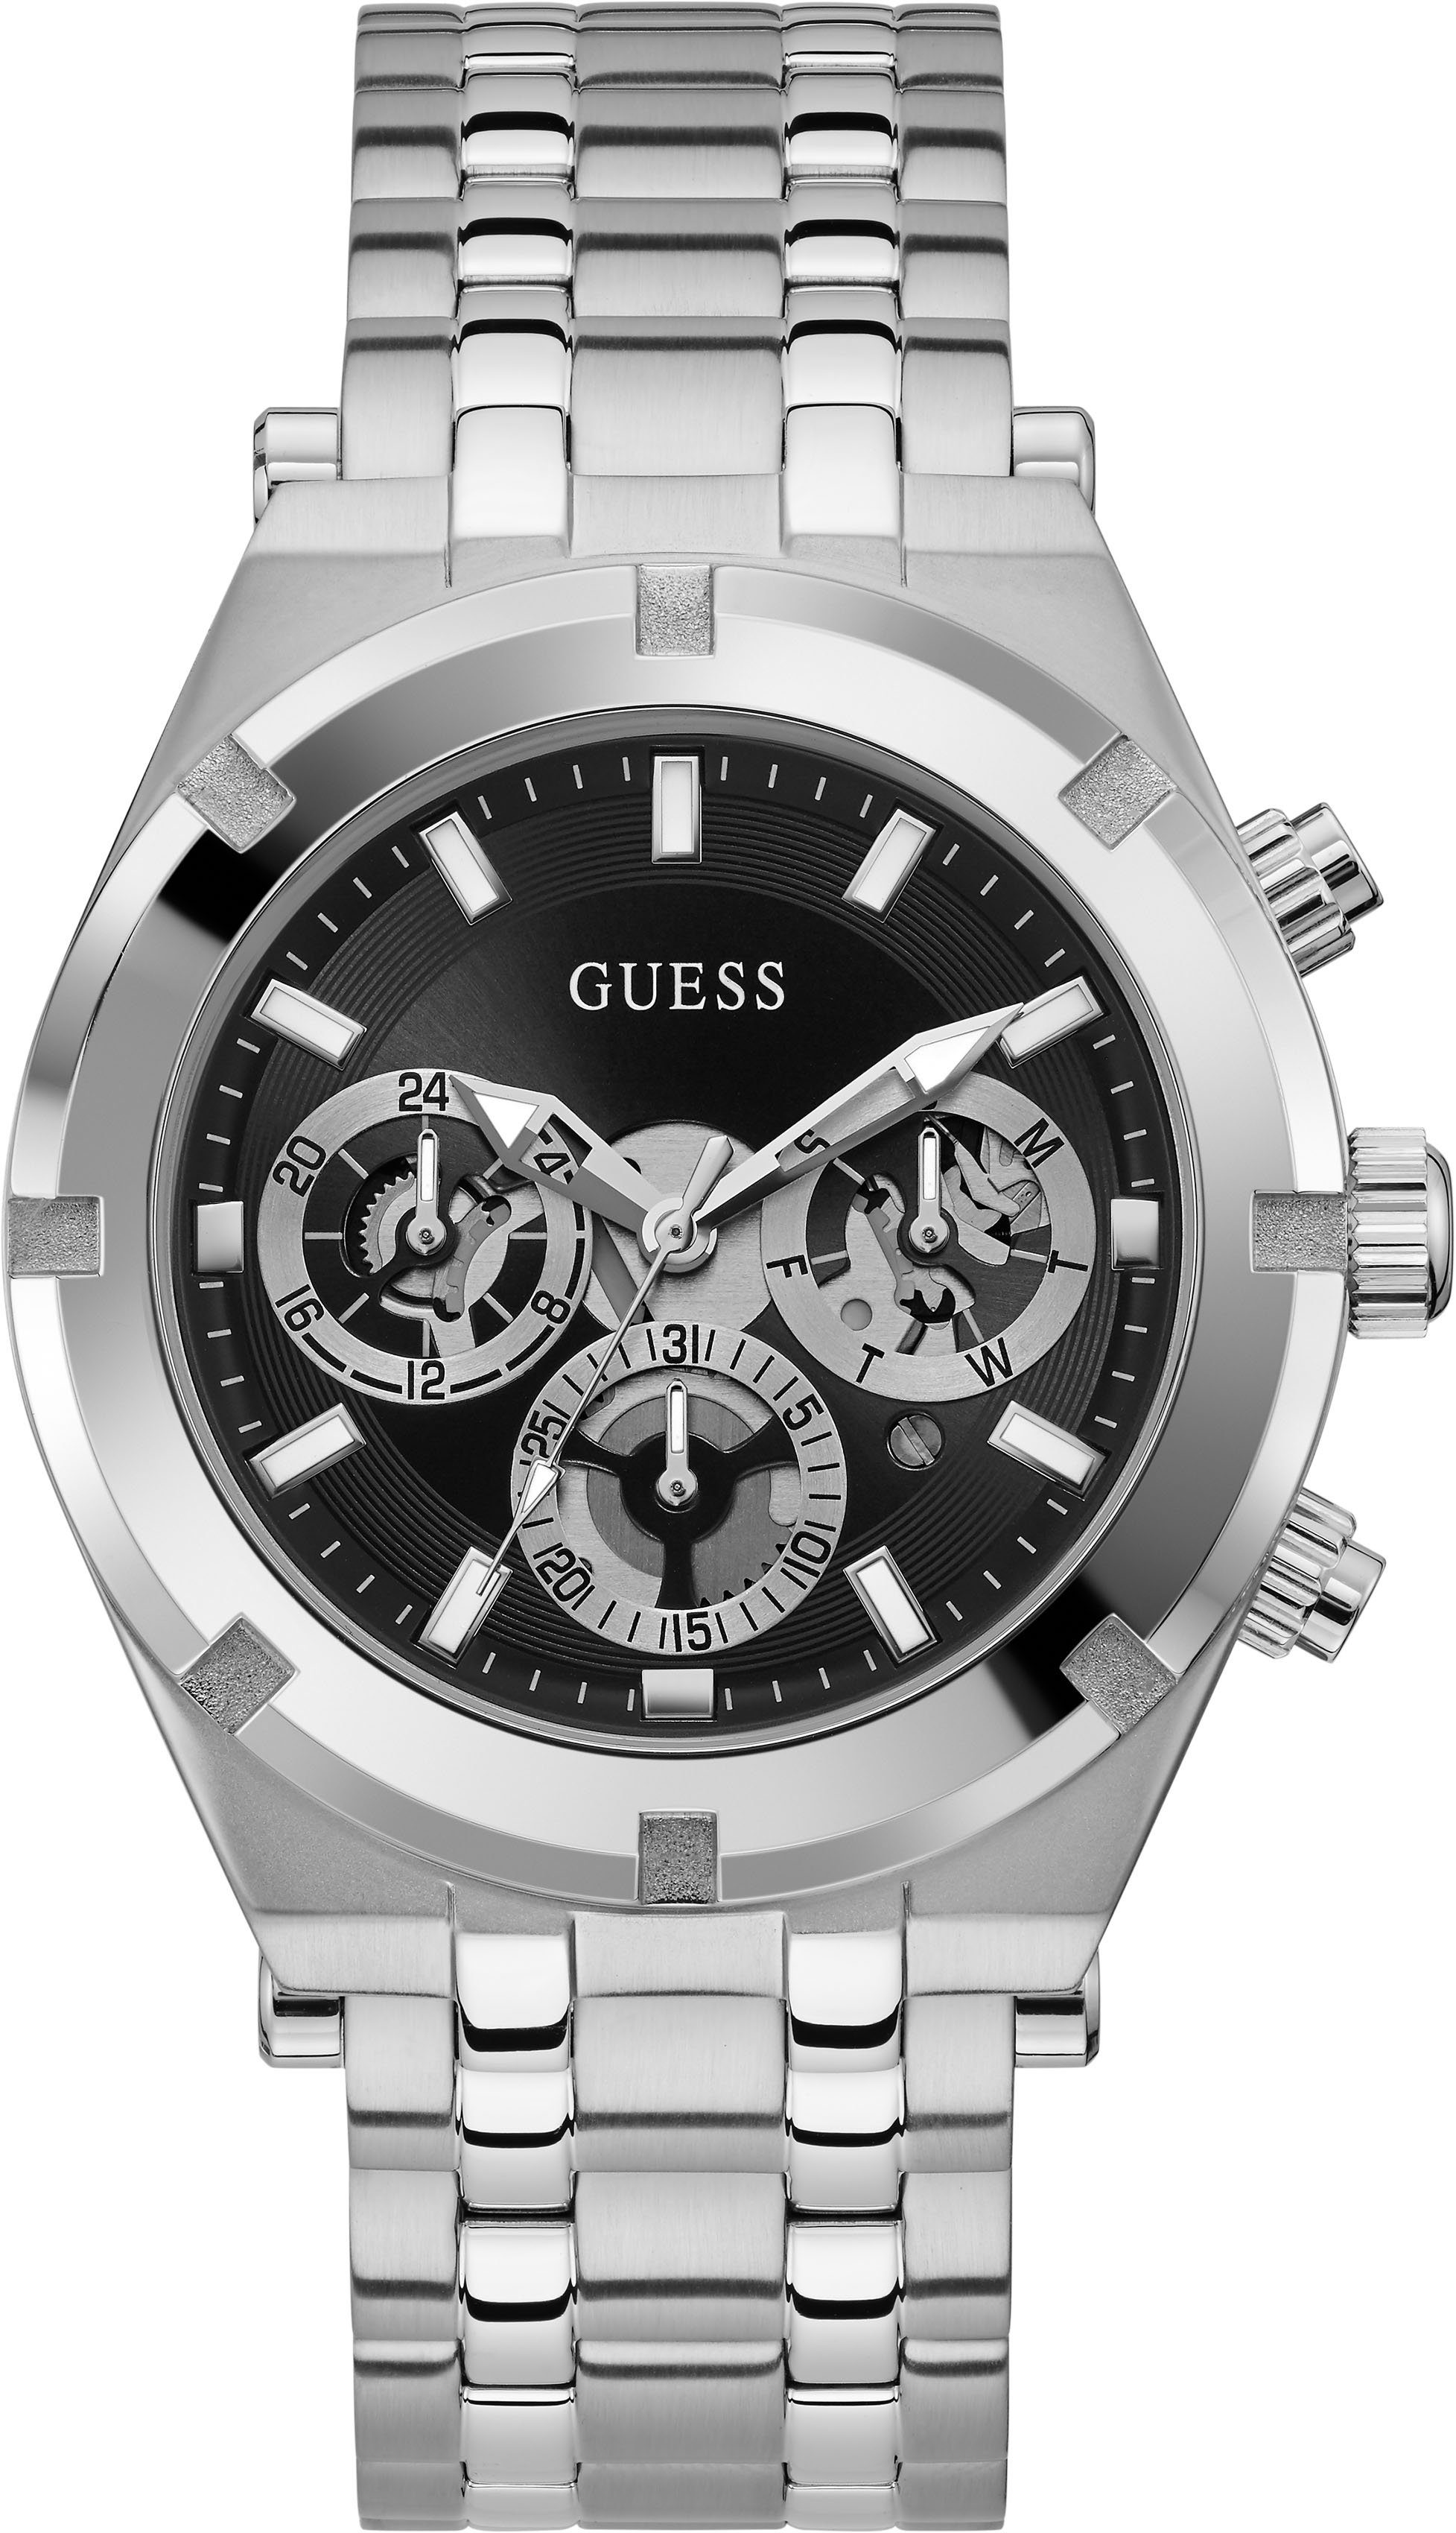 CONTINENTAL, GW0260G1 Multifunktionsuhr Guess